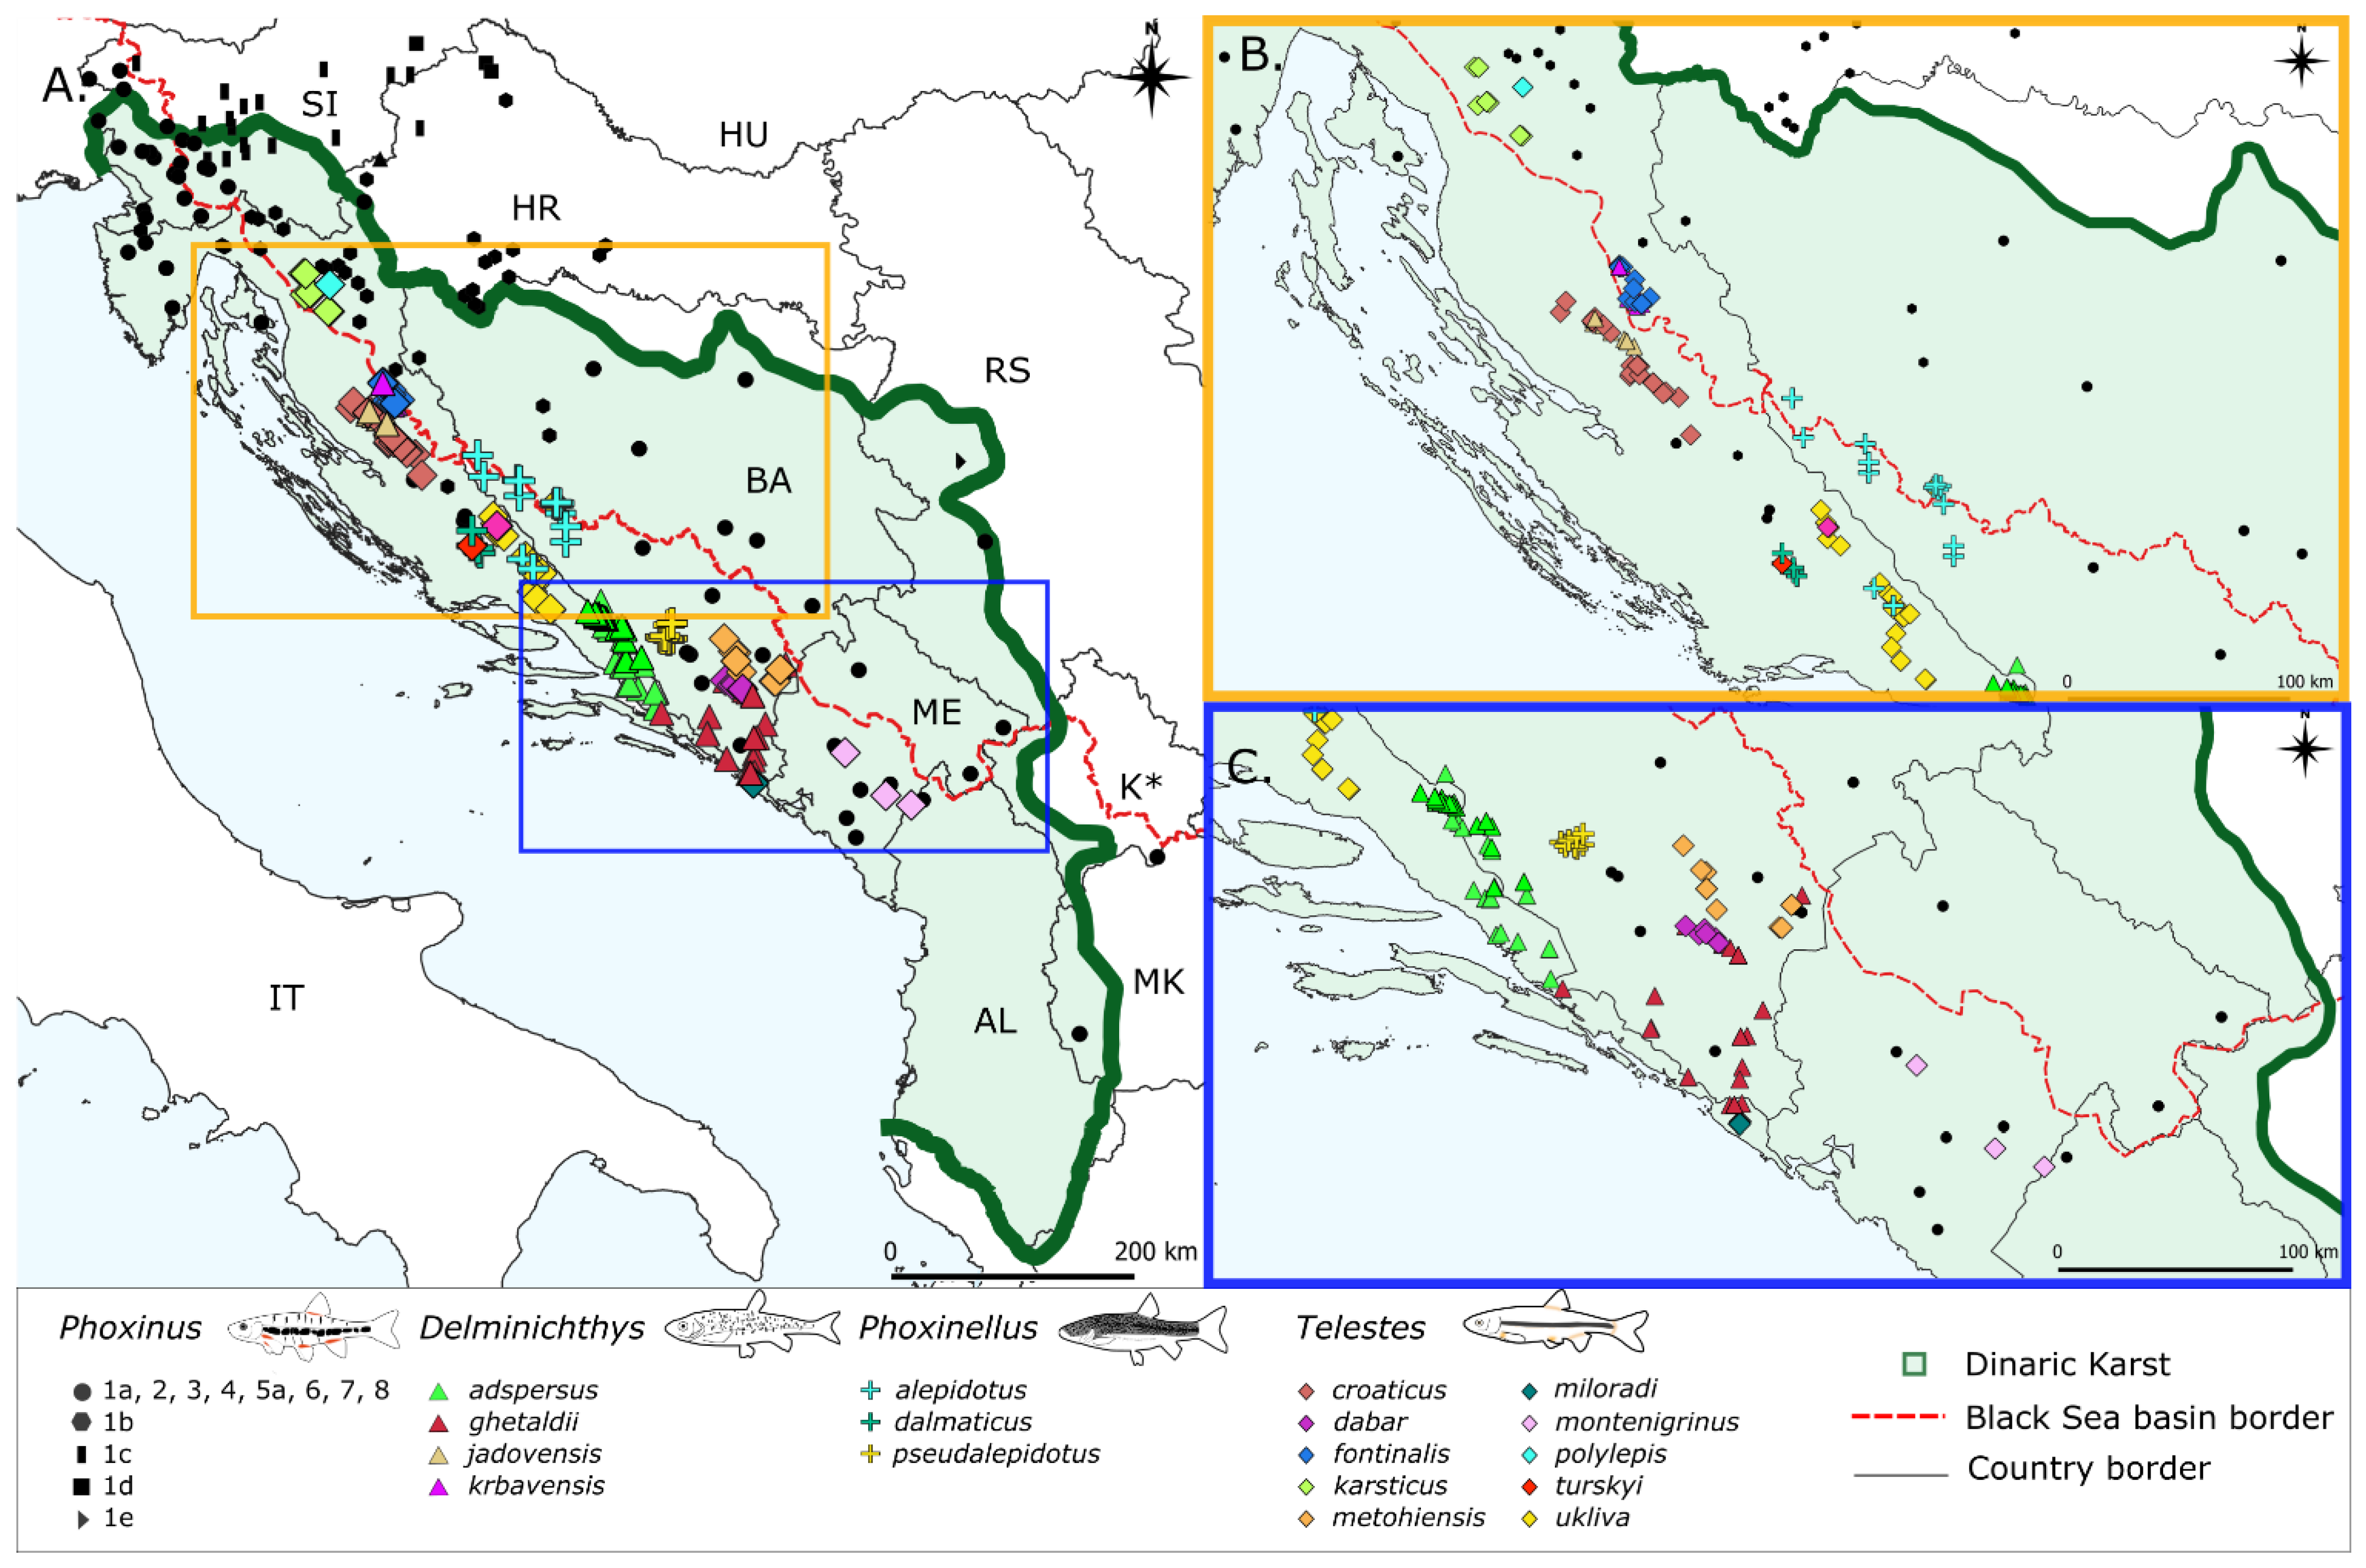 Diversity | Free Full-Text | Comparative Phylogeography of Phoxinus,  Delminichthys, Phoxinellus and Telestes in Dinaric Karst: Which Factors  Have Influenced Their Current Distributions? | HTML